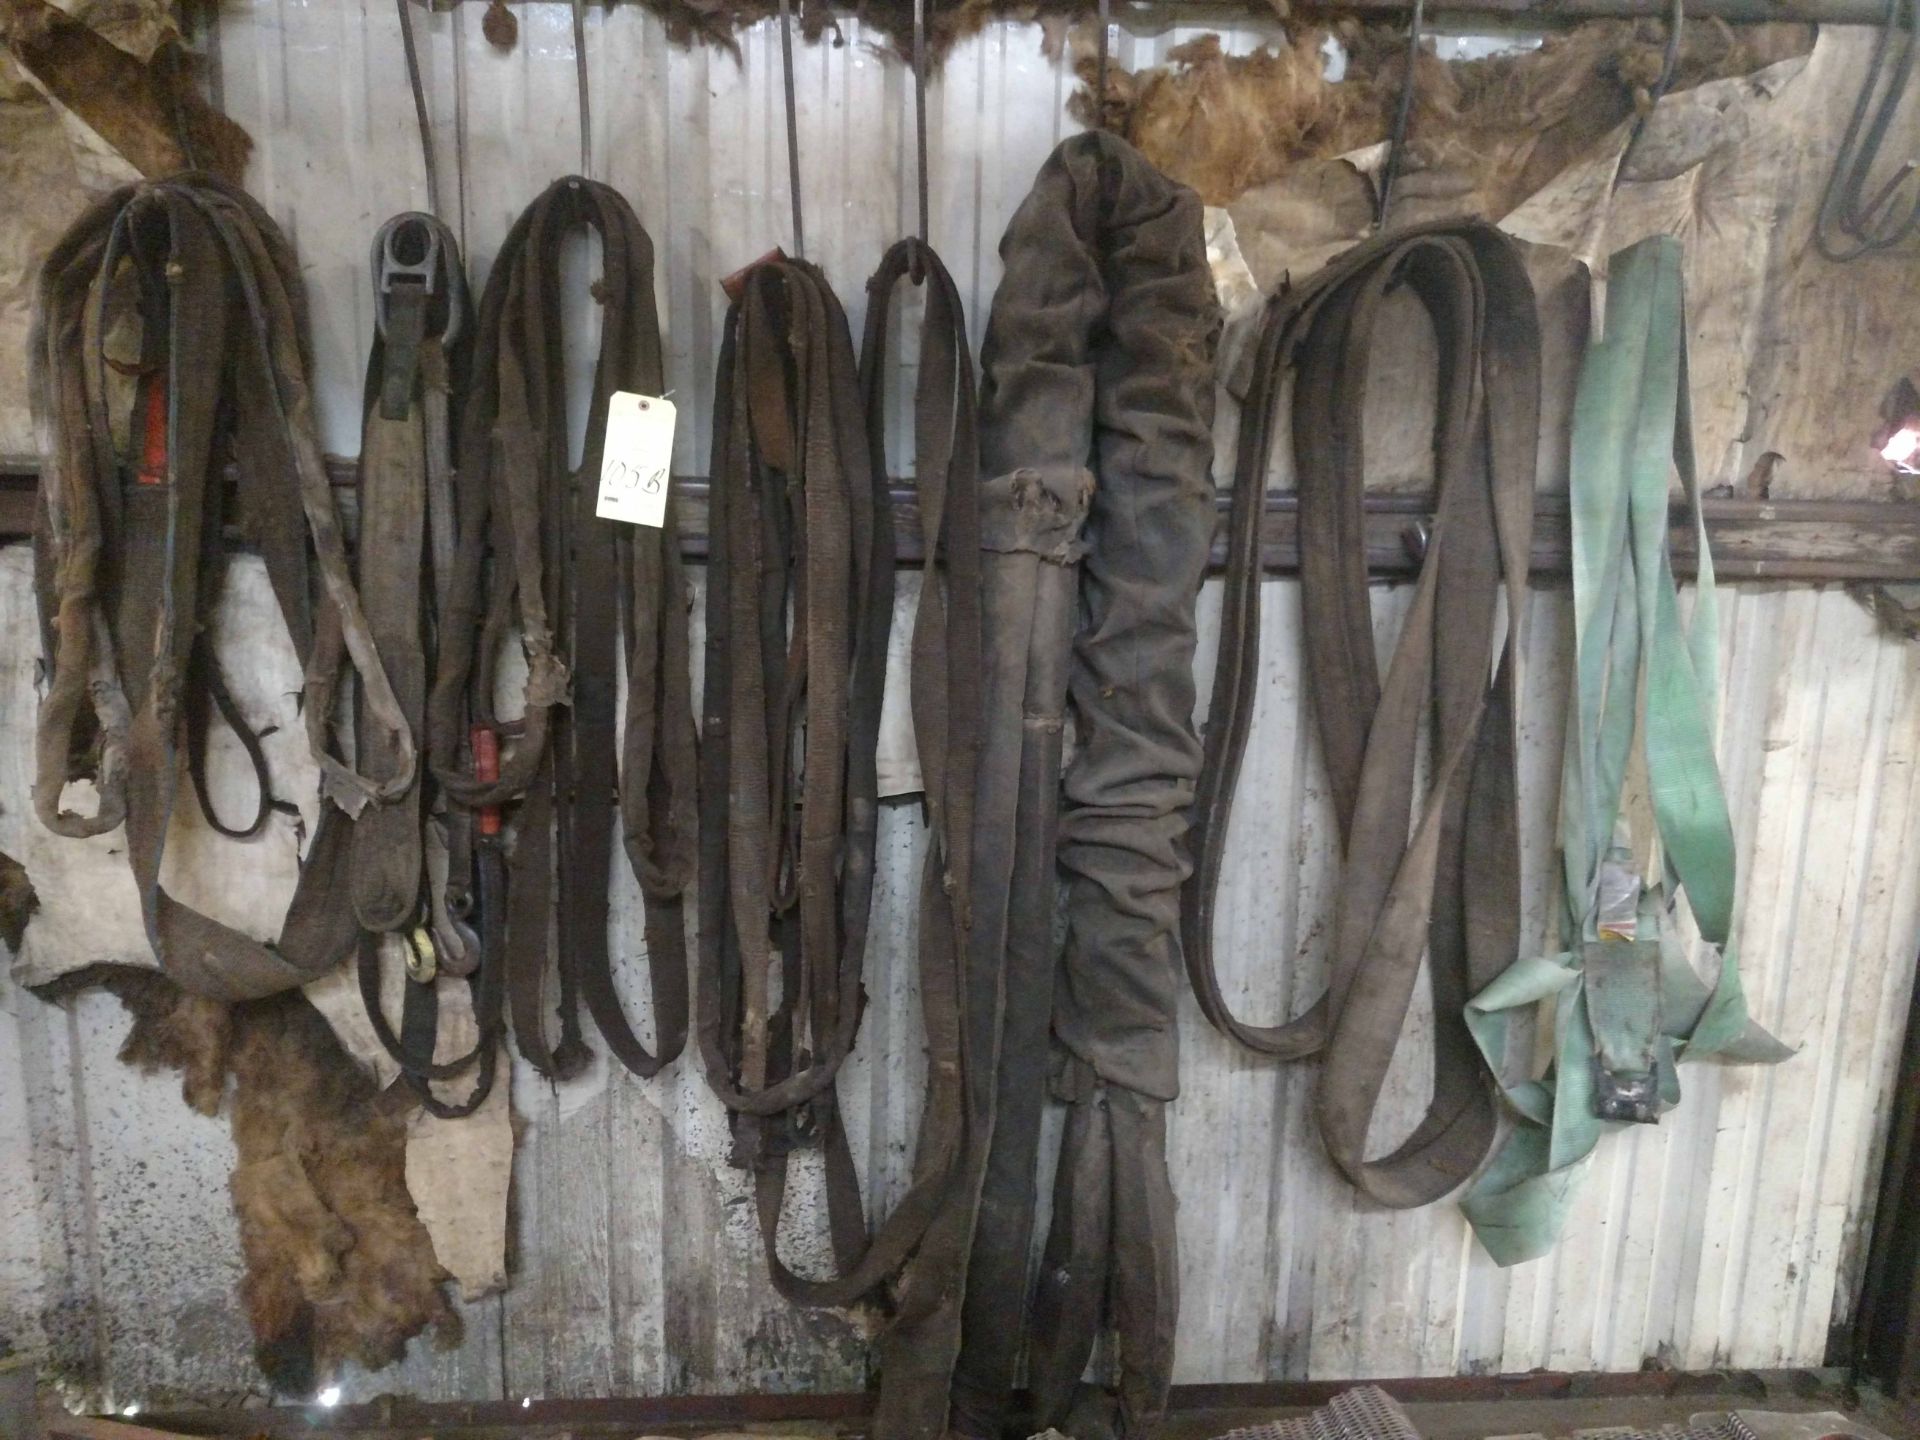 LOT CONSISTING OF: misc. lifting slings & straps